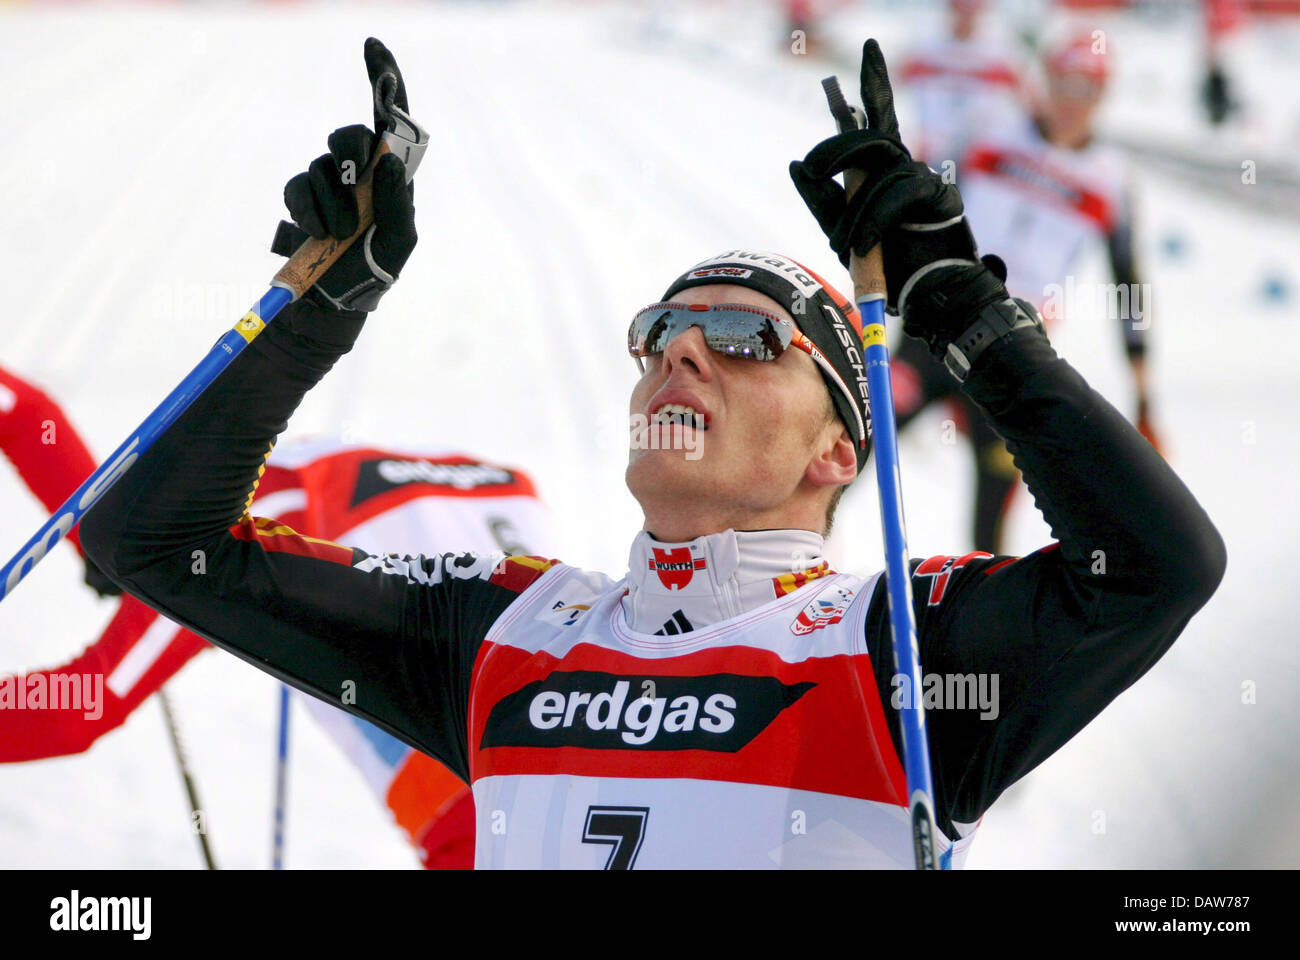 Third placed German Jens Filbrich celebrates exhaustedly after the men's 50km cross country competition at the Nordic Skiing World Championships in Sapporo, northern Japan, Sunday, 04 March 2007. Photo: KAY NIETFELD Stock Photo